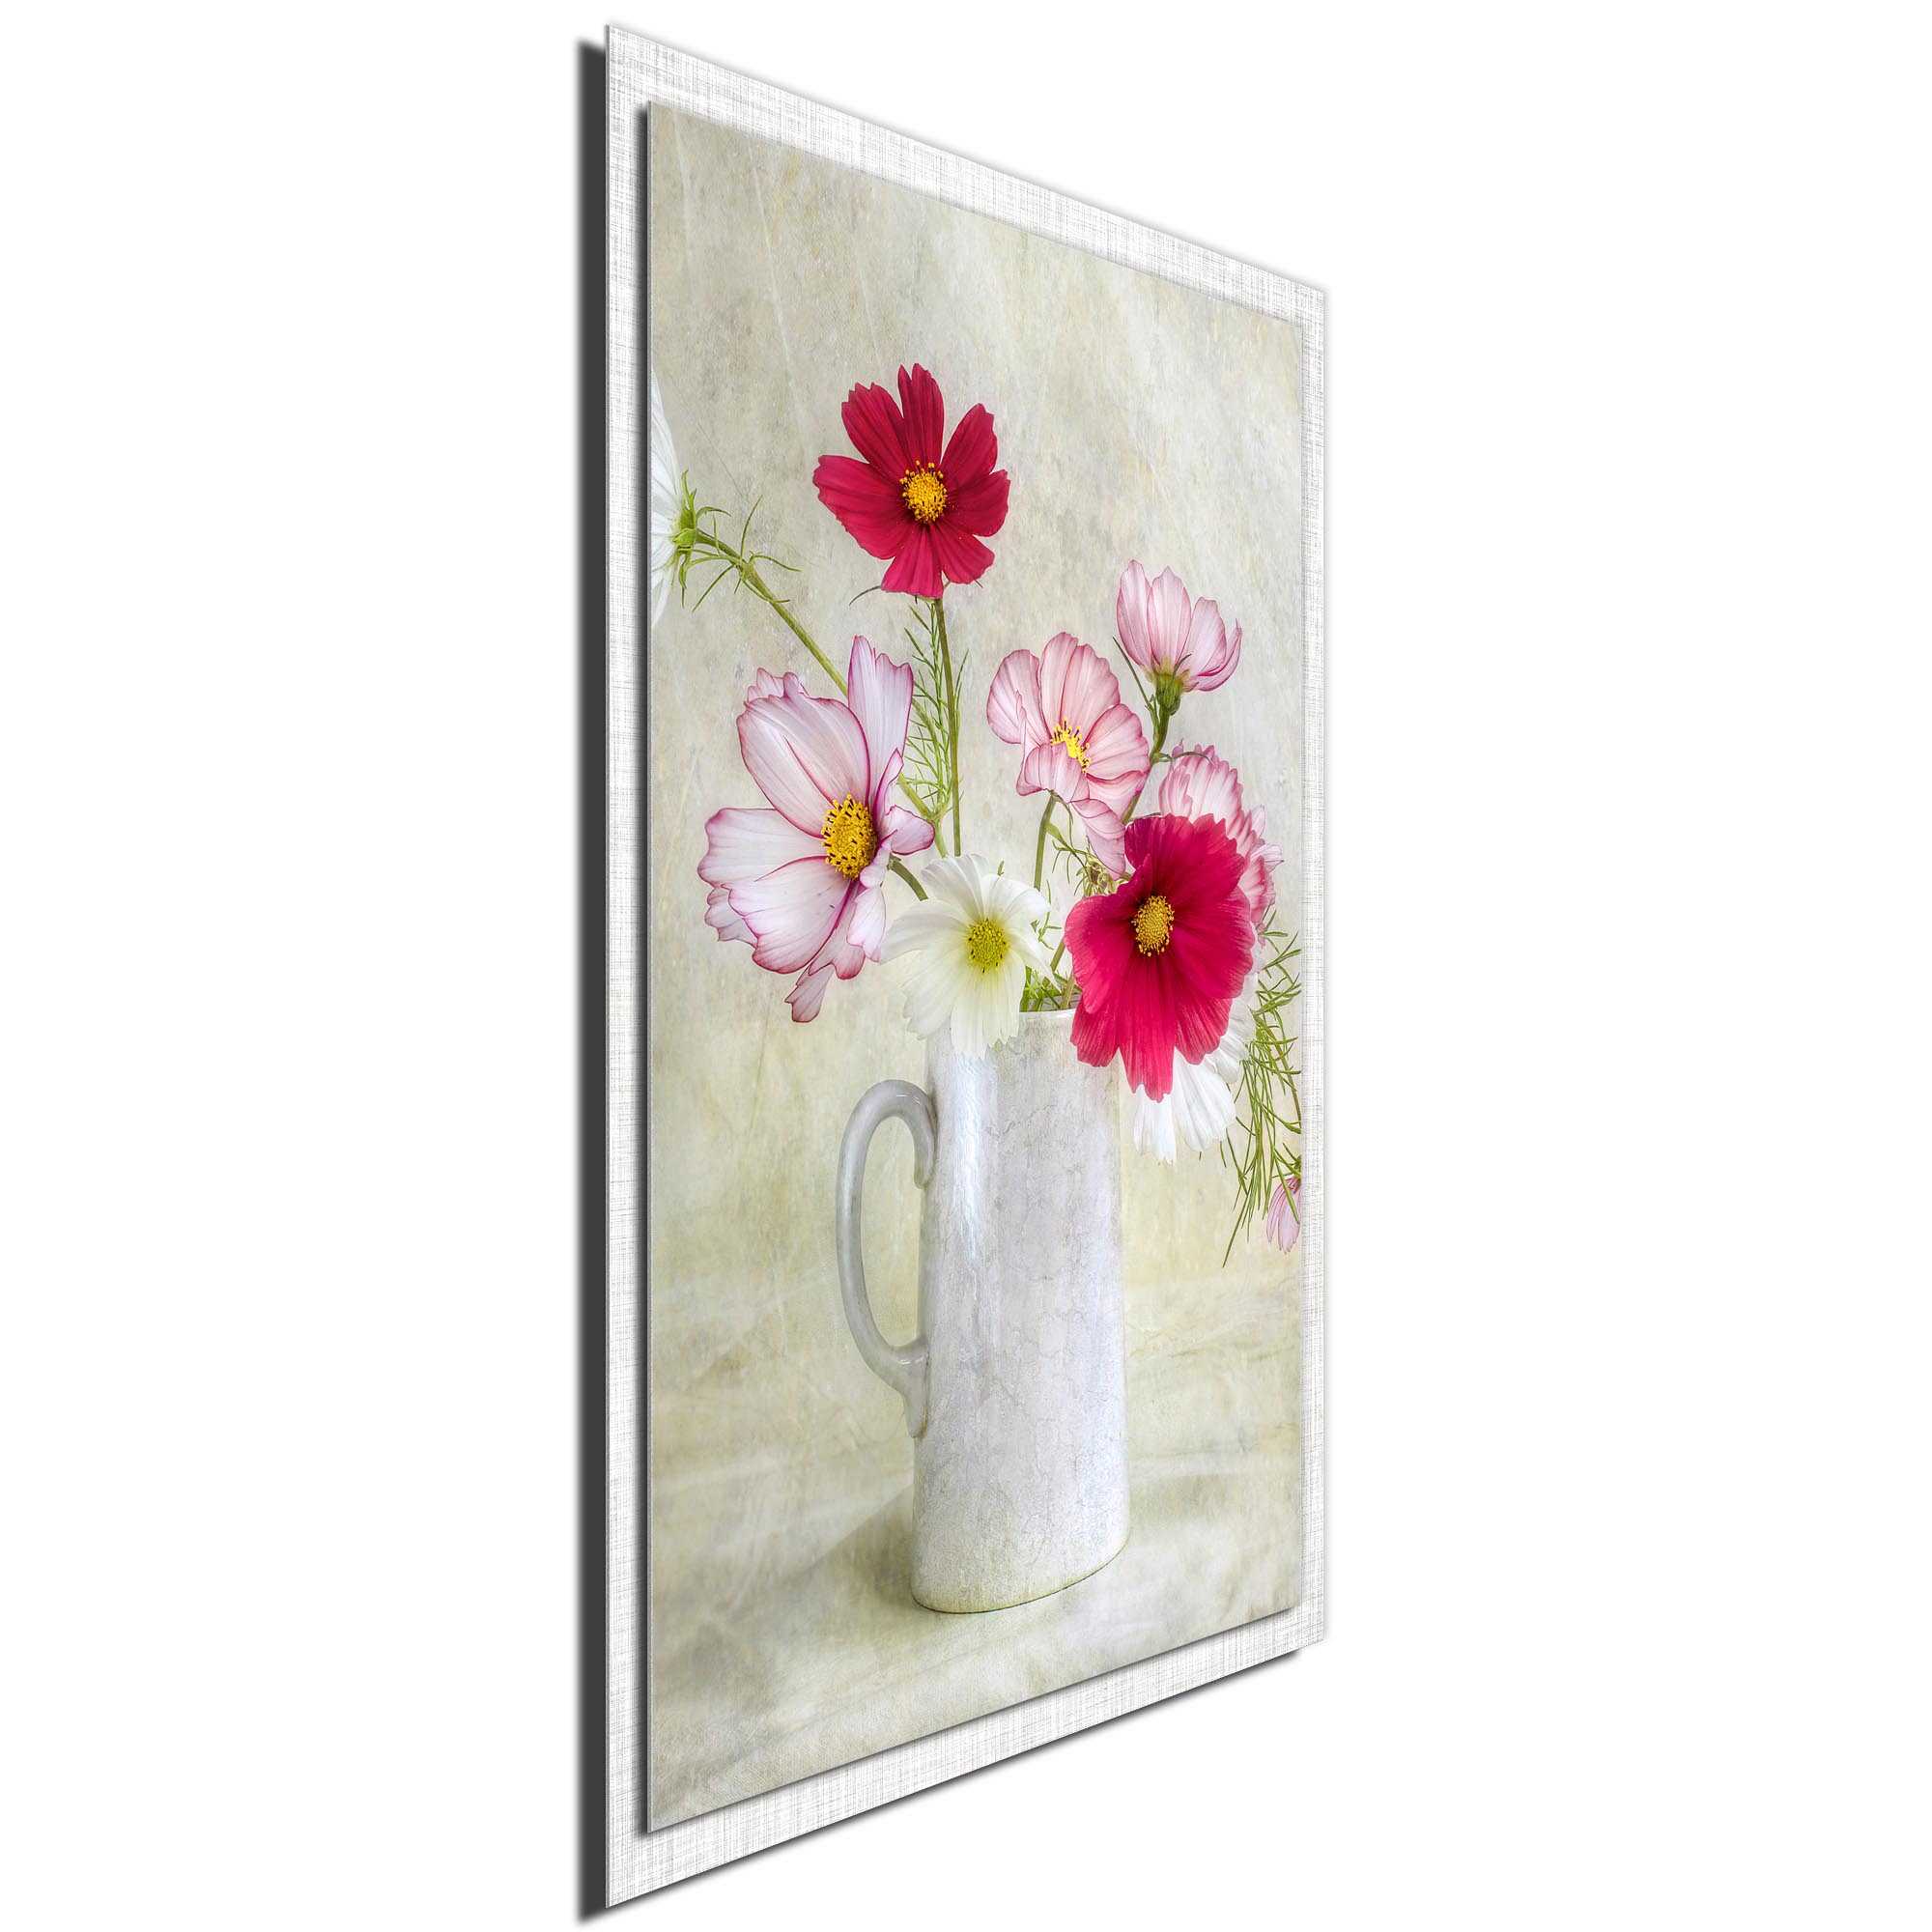 Cosmos Carnival by Mandy Disher - Modern Farmhouse Floral on Metal - Image 2